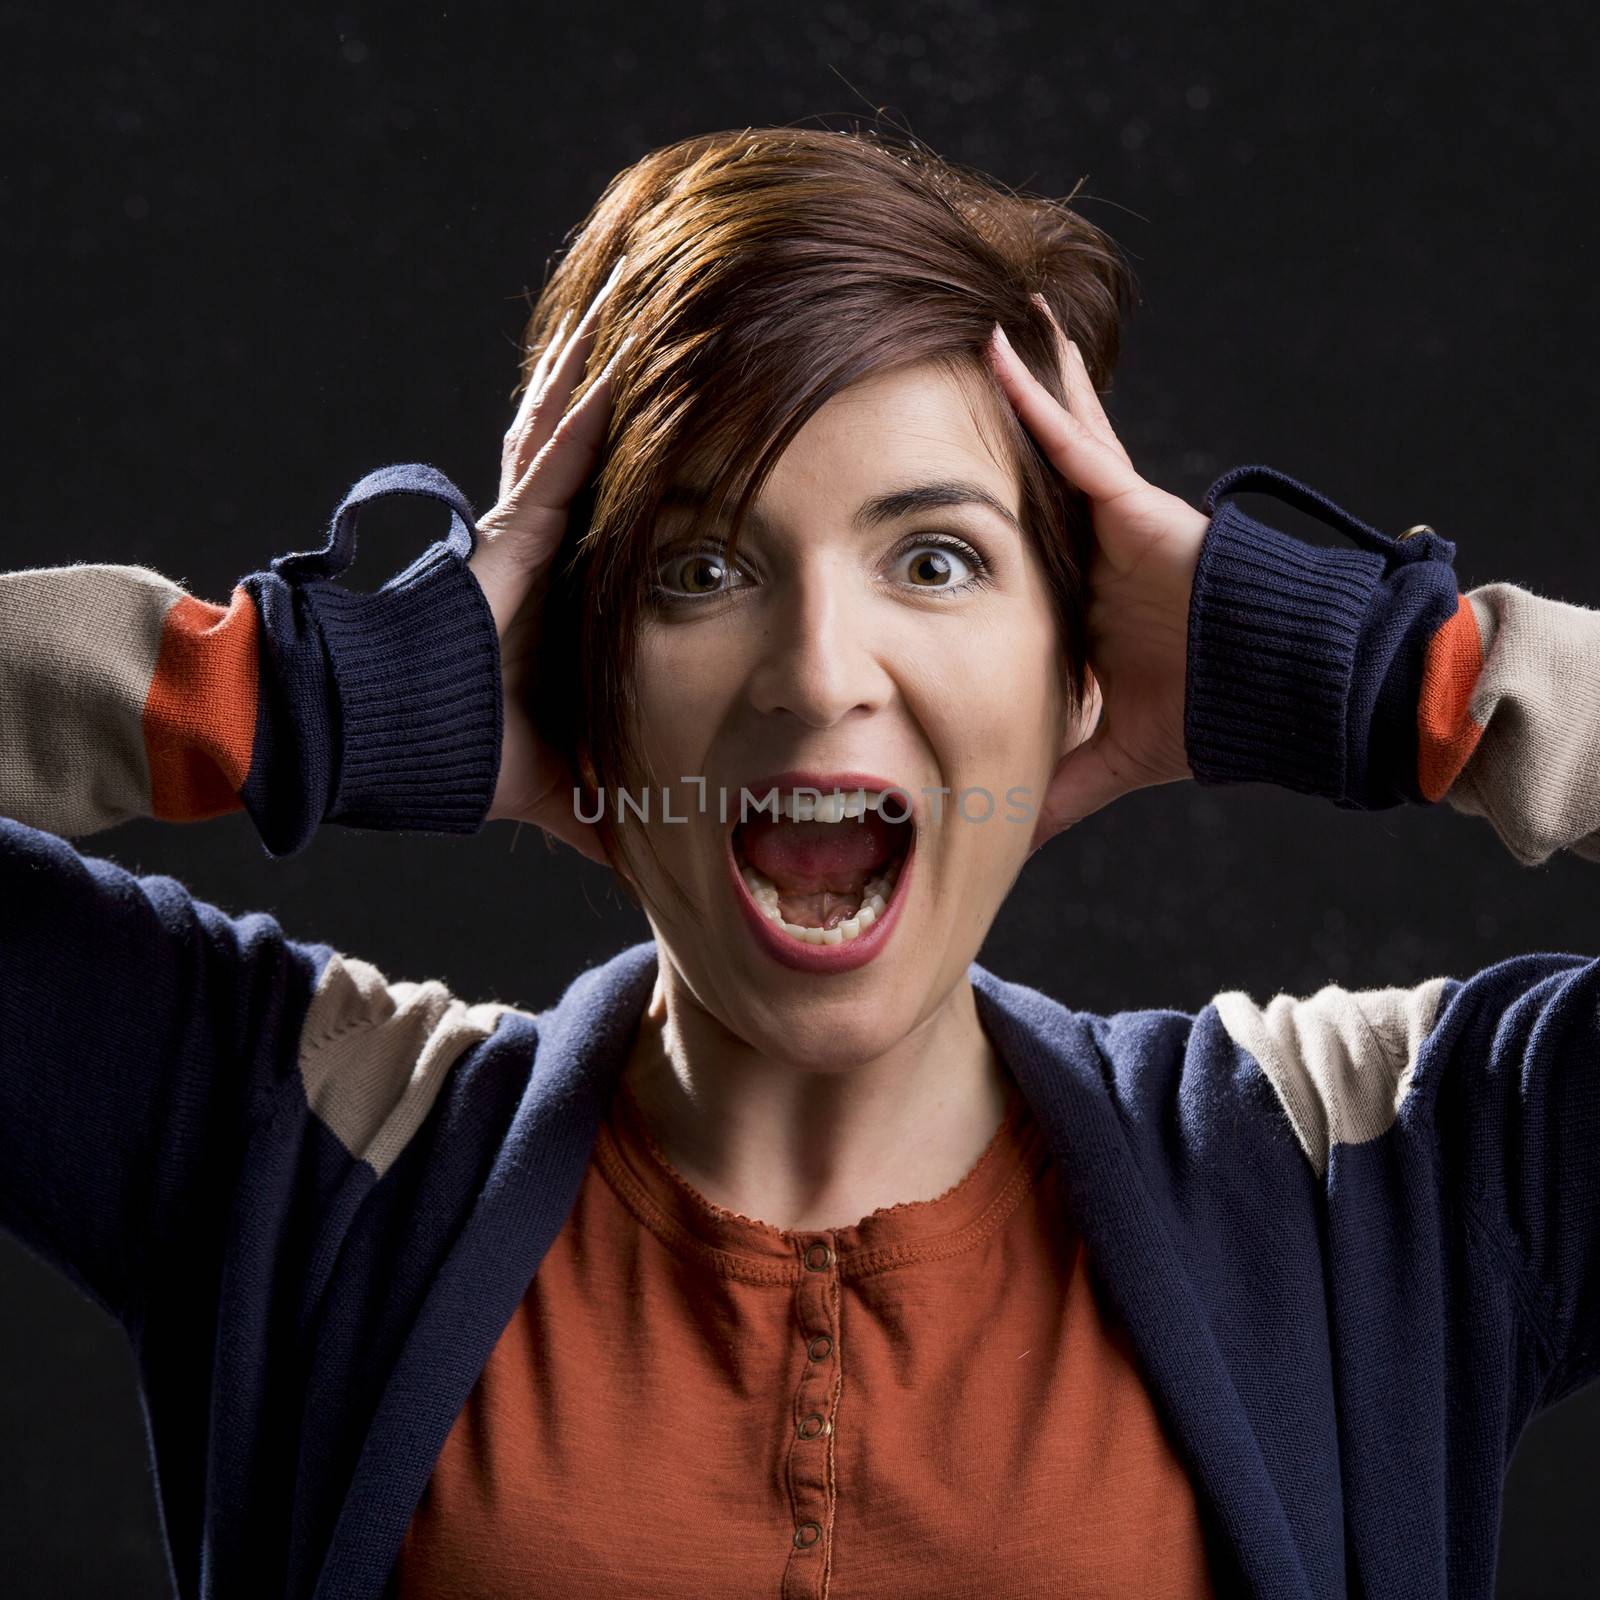 Woman yelling with hands on the head